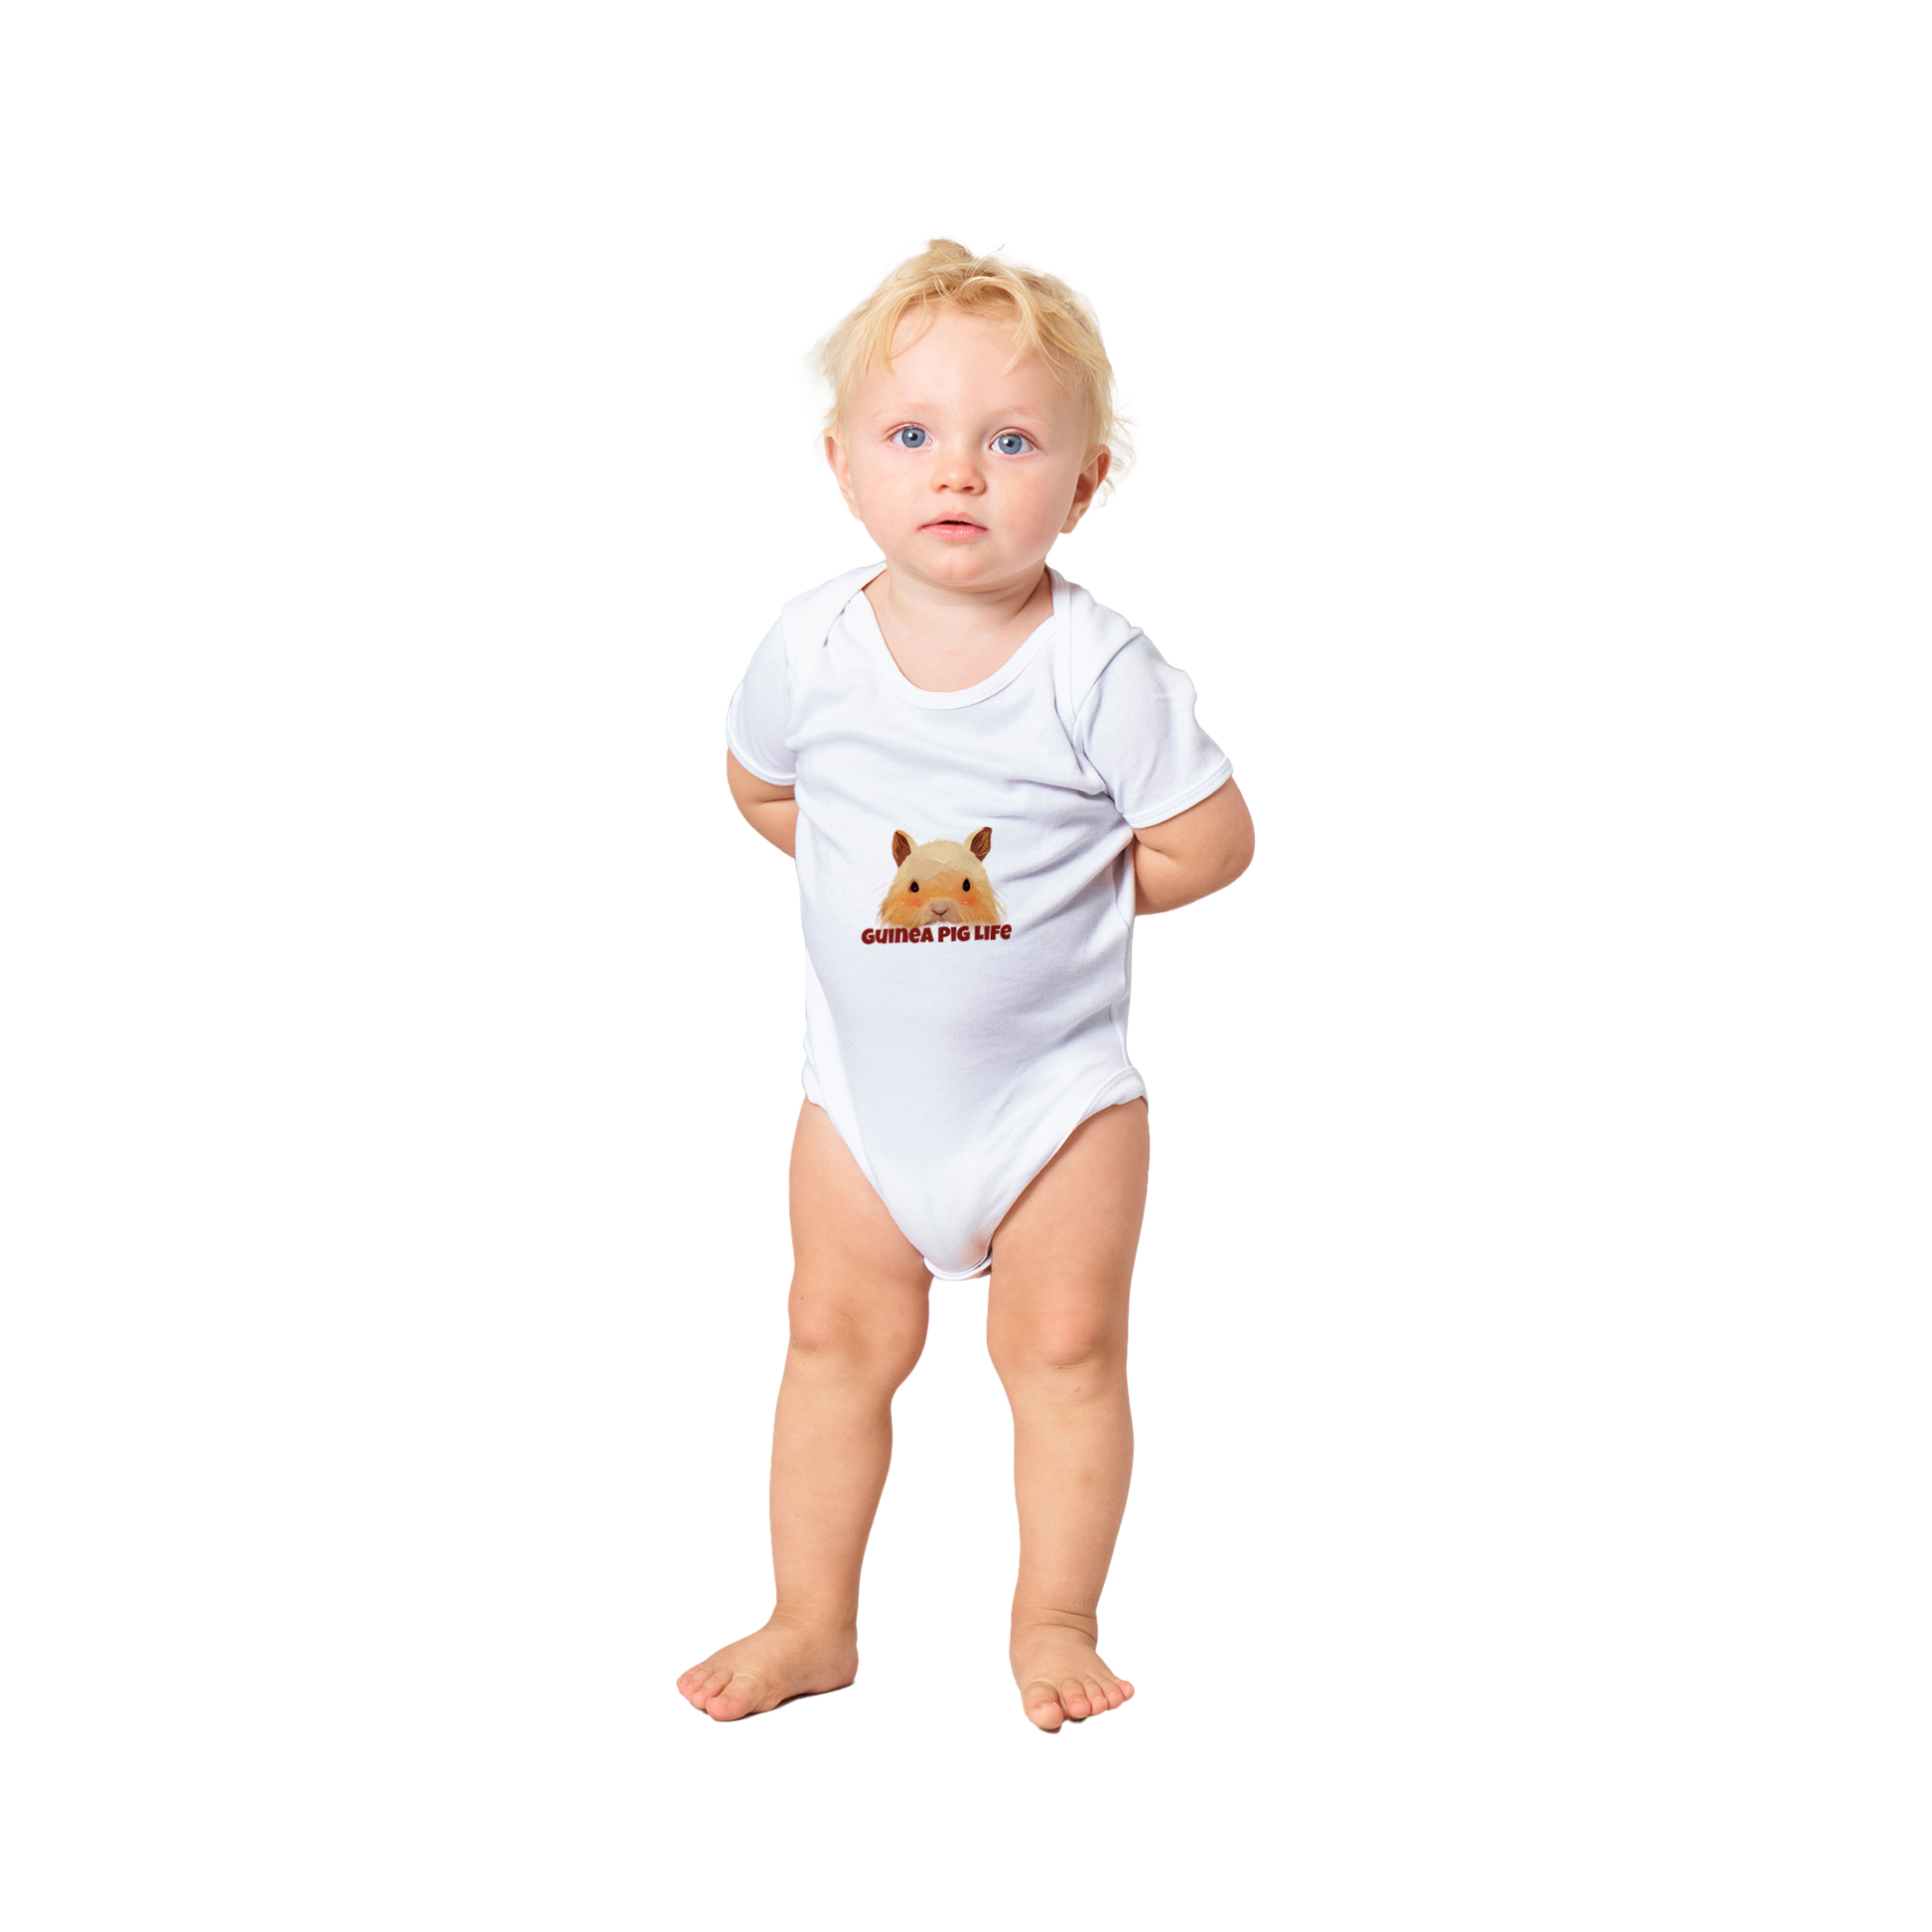 Baby wearing White short sleeve baby onesie with cute Guinea Pig life print